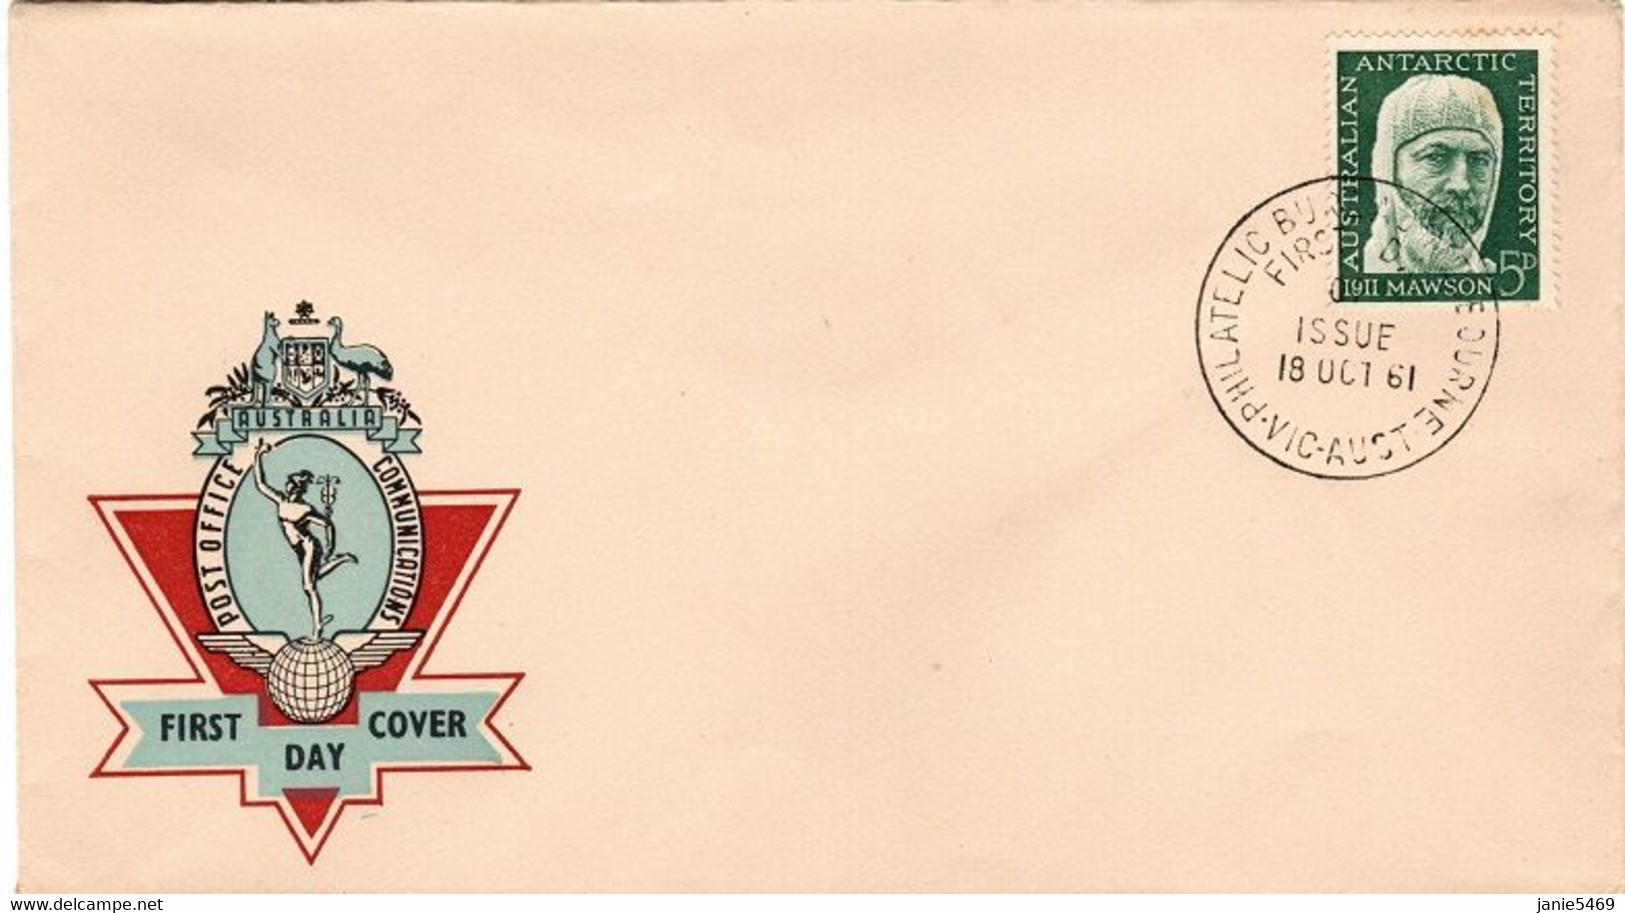 Australian Antarctic Territory 1961 Mawson Official First Day Cover - FDC